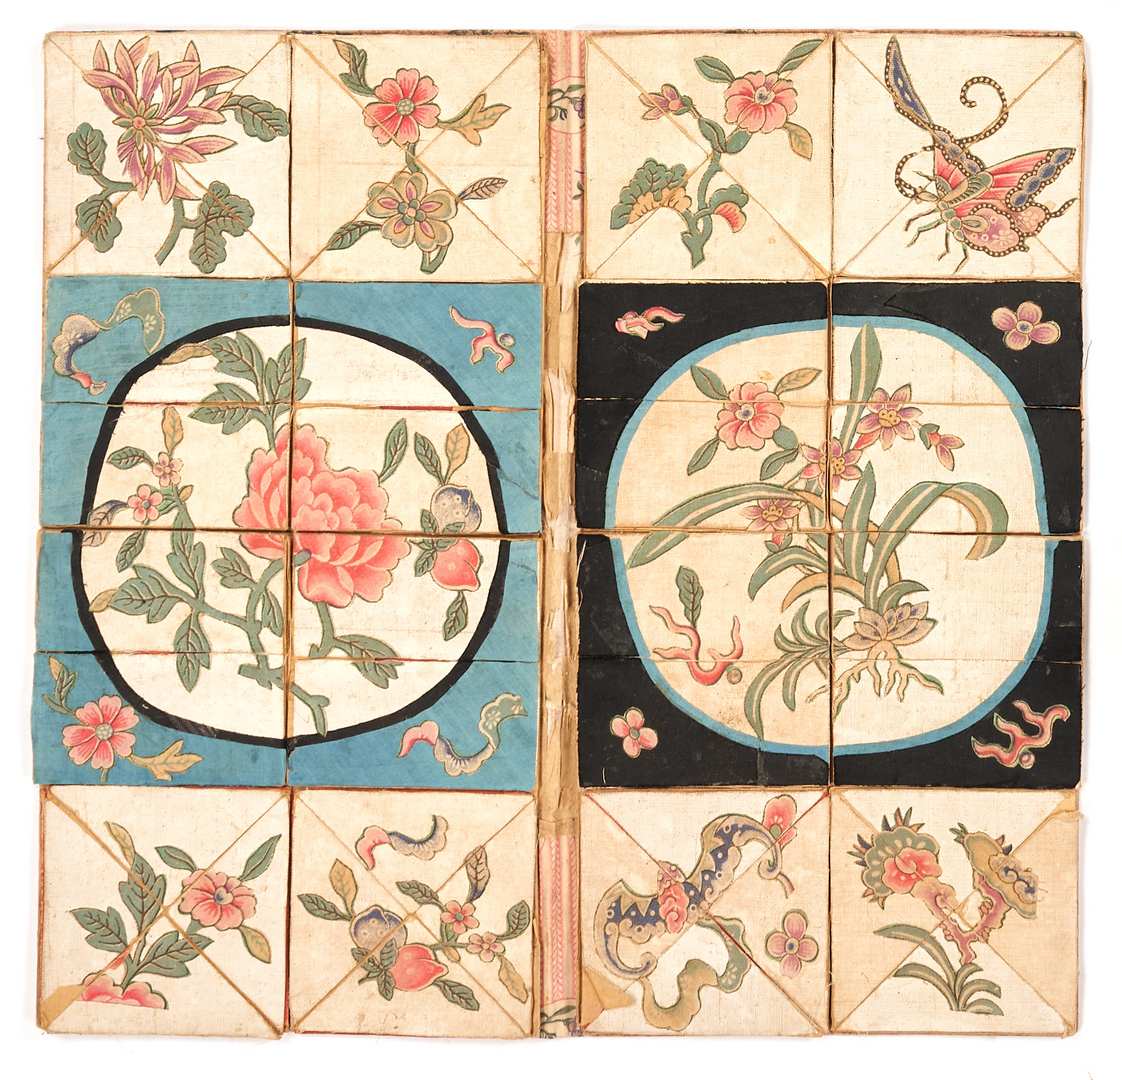 Lot 328: 12 Asian Decorative Items, Incl. Mother of Pearl Plaque & Embroidery